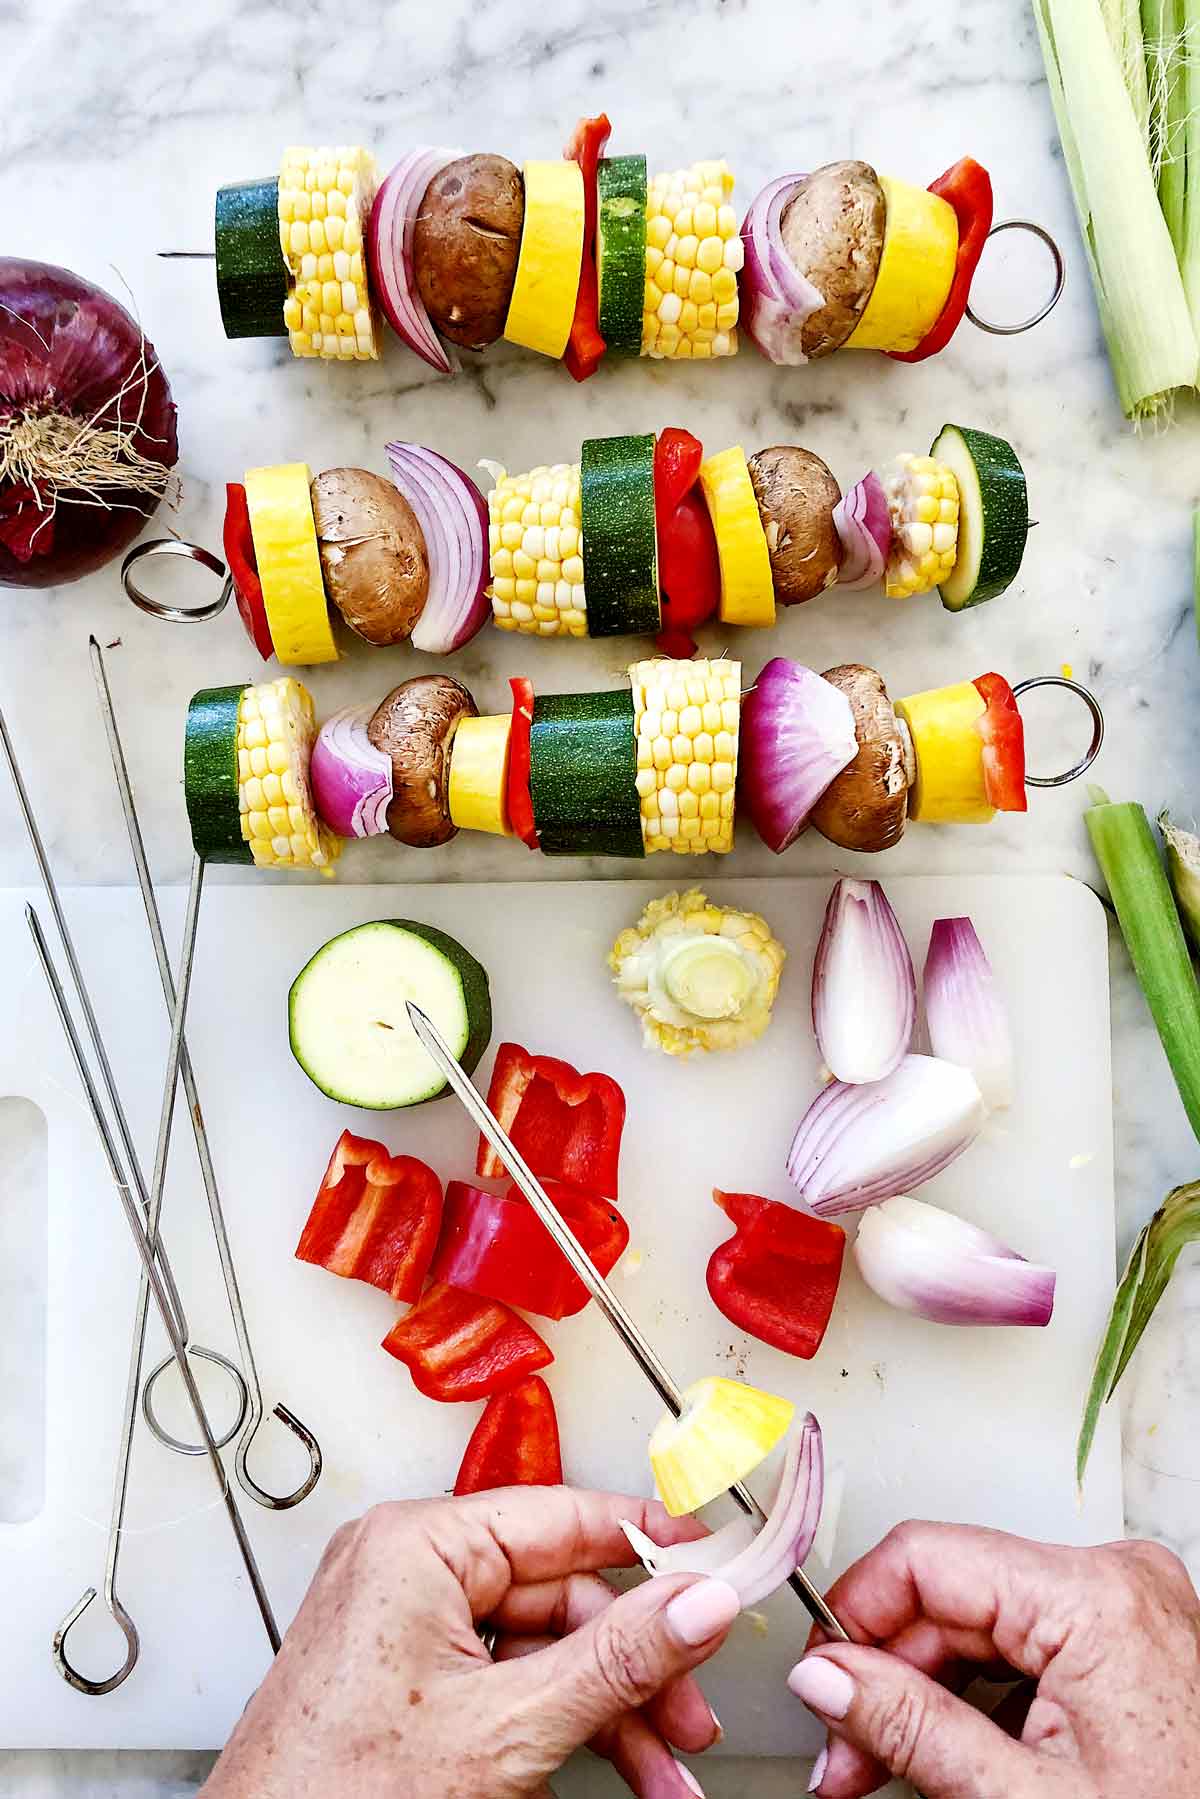 Grilled Veggie Skewers - The Culinary Compass